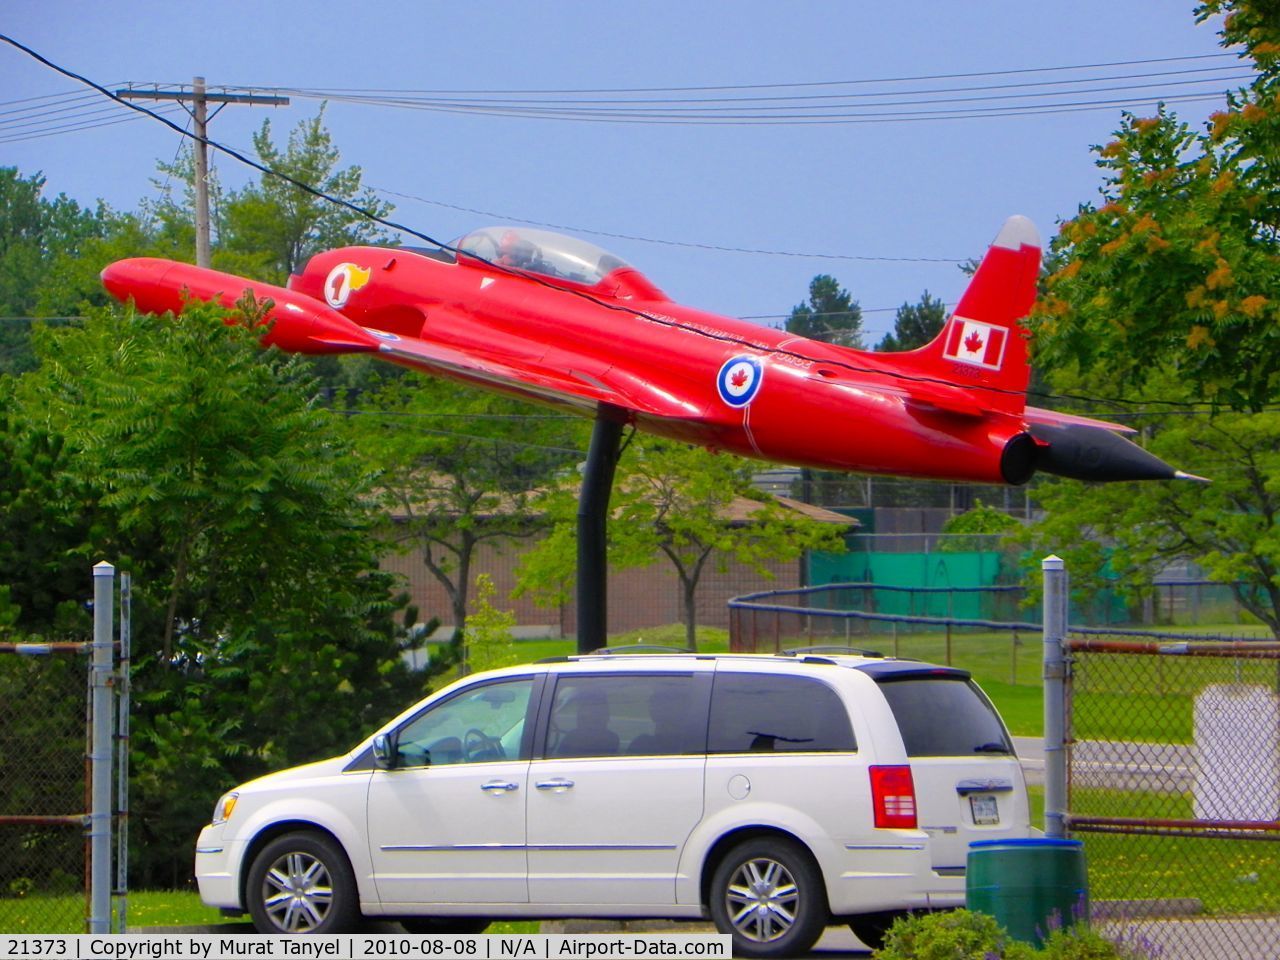 21373, 1954 Canadair CT-133 Silver Star 3 C/N T33-373, It is now a museum piece. (N/A = 